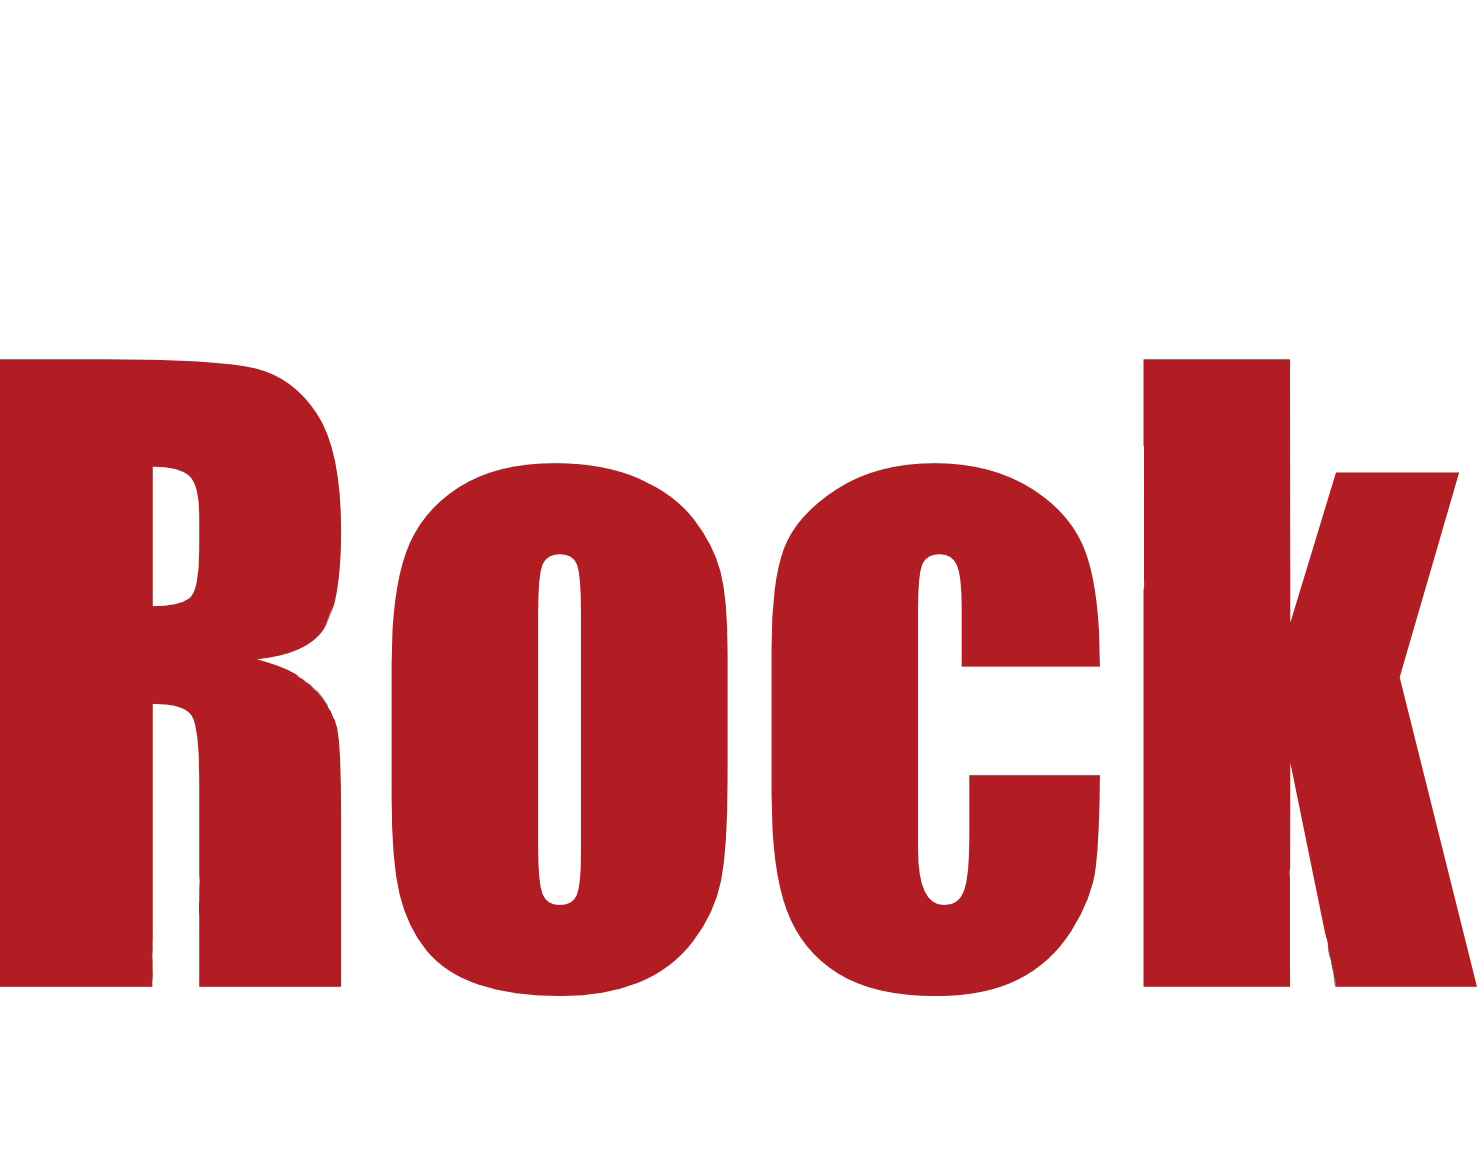 Rock Technical Solutions Inc.